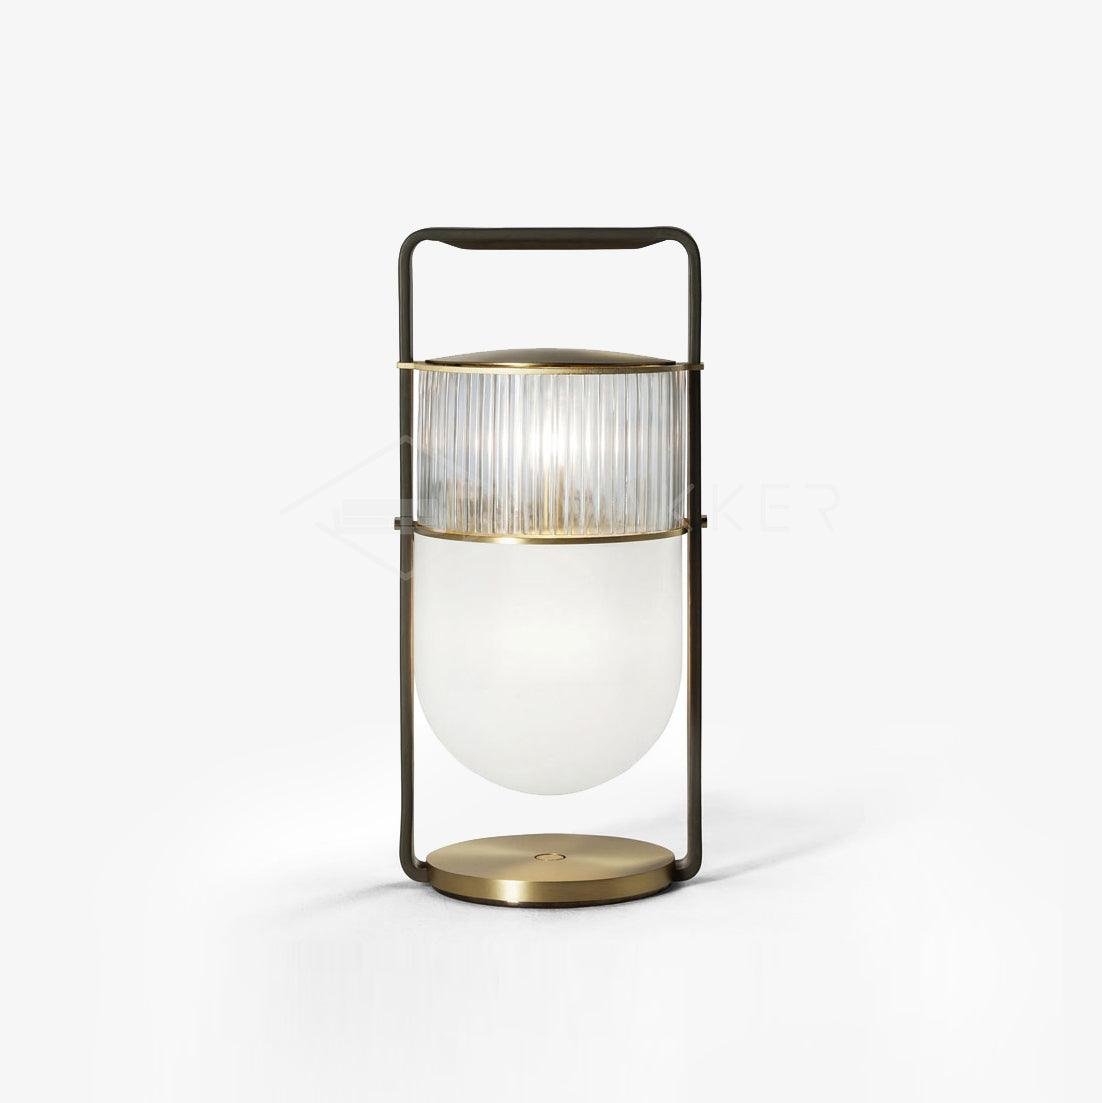 Xi Table Lamp in White with Transparent Elements, ∅ 7.9″ x H 16.5″ (Dia 20cm x H 42cm), US Plug